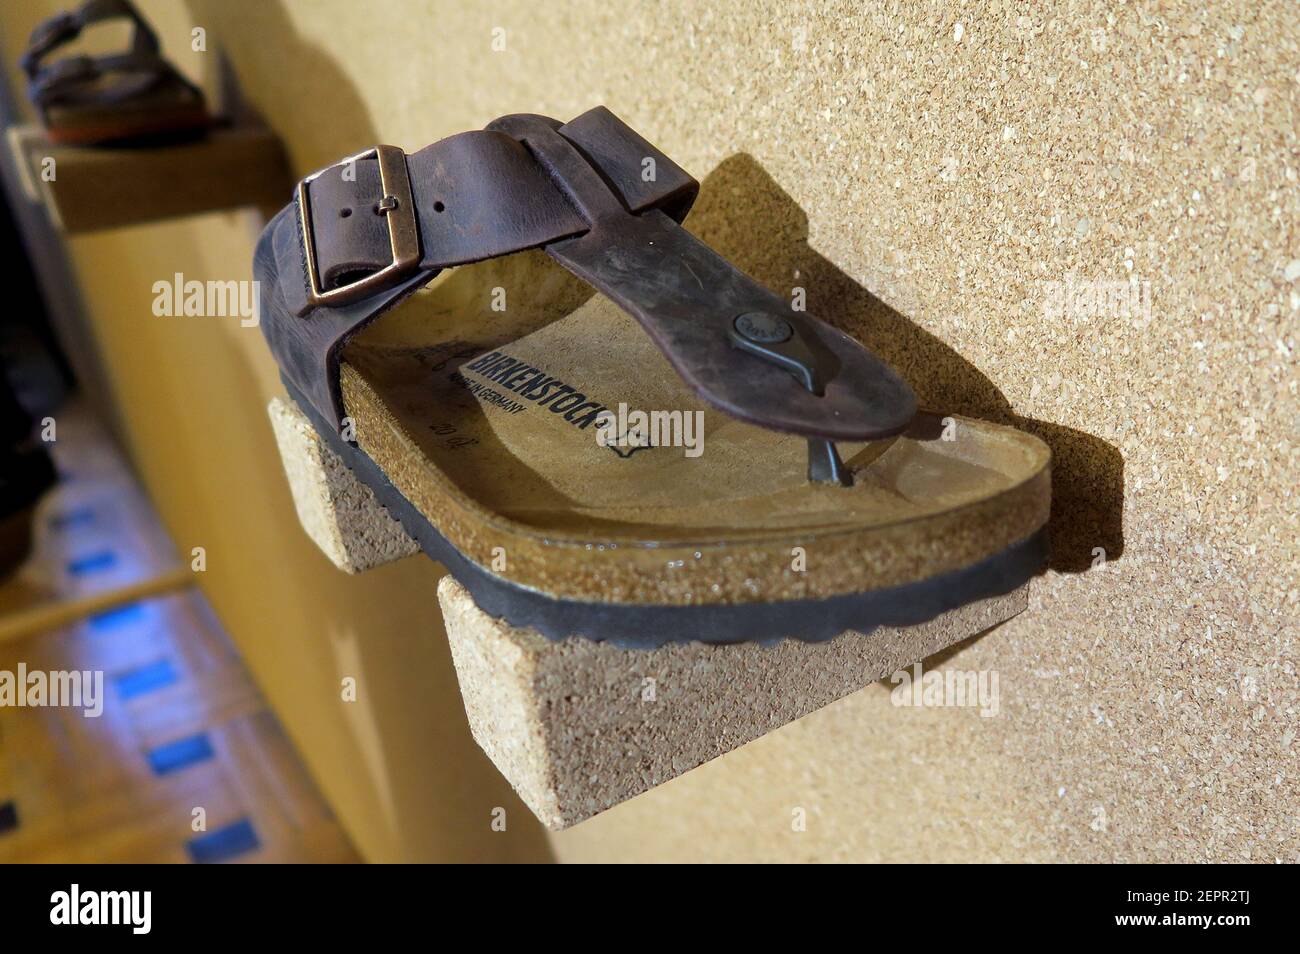 Berlin, Germany. 15th Jan, 2018. A sandal with cork sole by Birkenstock  taken at the Zeit magazine and Vogue conference "The Relevance Of Fashion"  at Kronprinzenpalais in Berlin Mitte on Jan. 15,